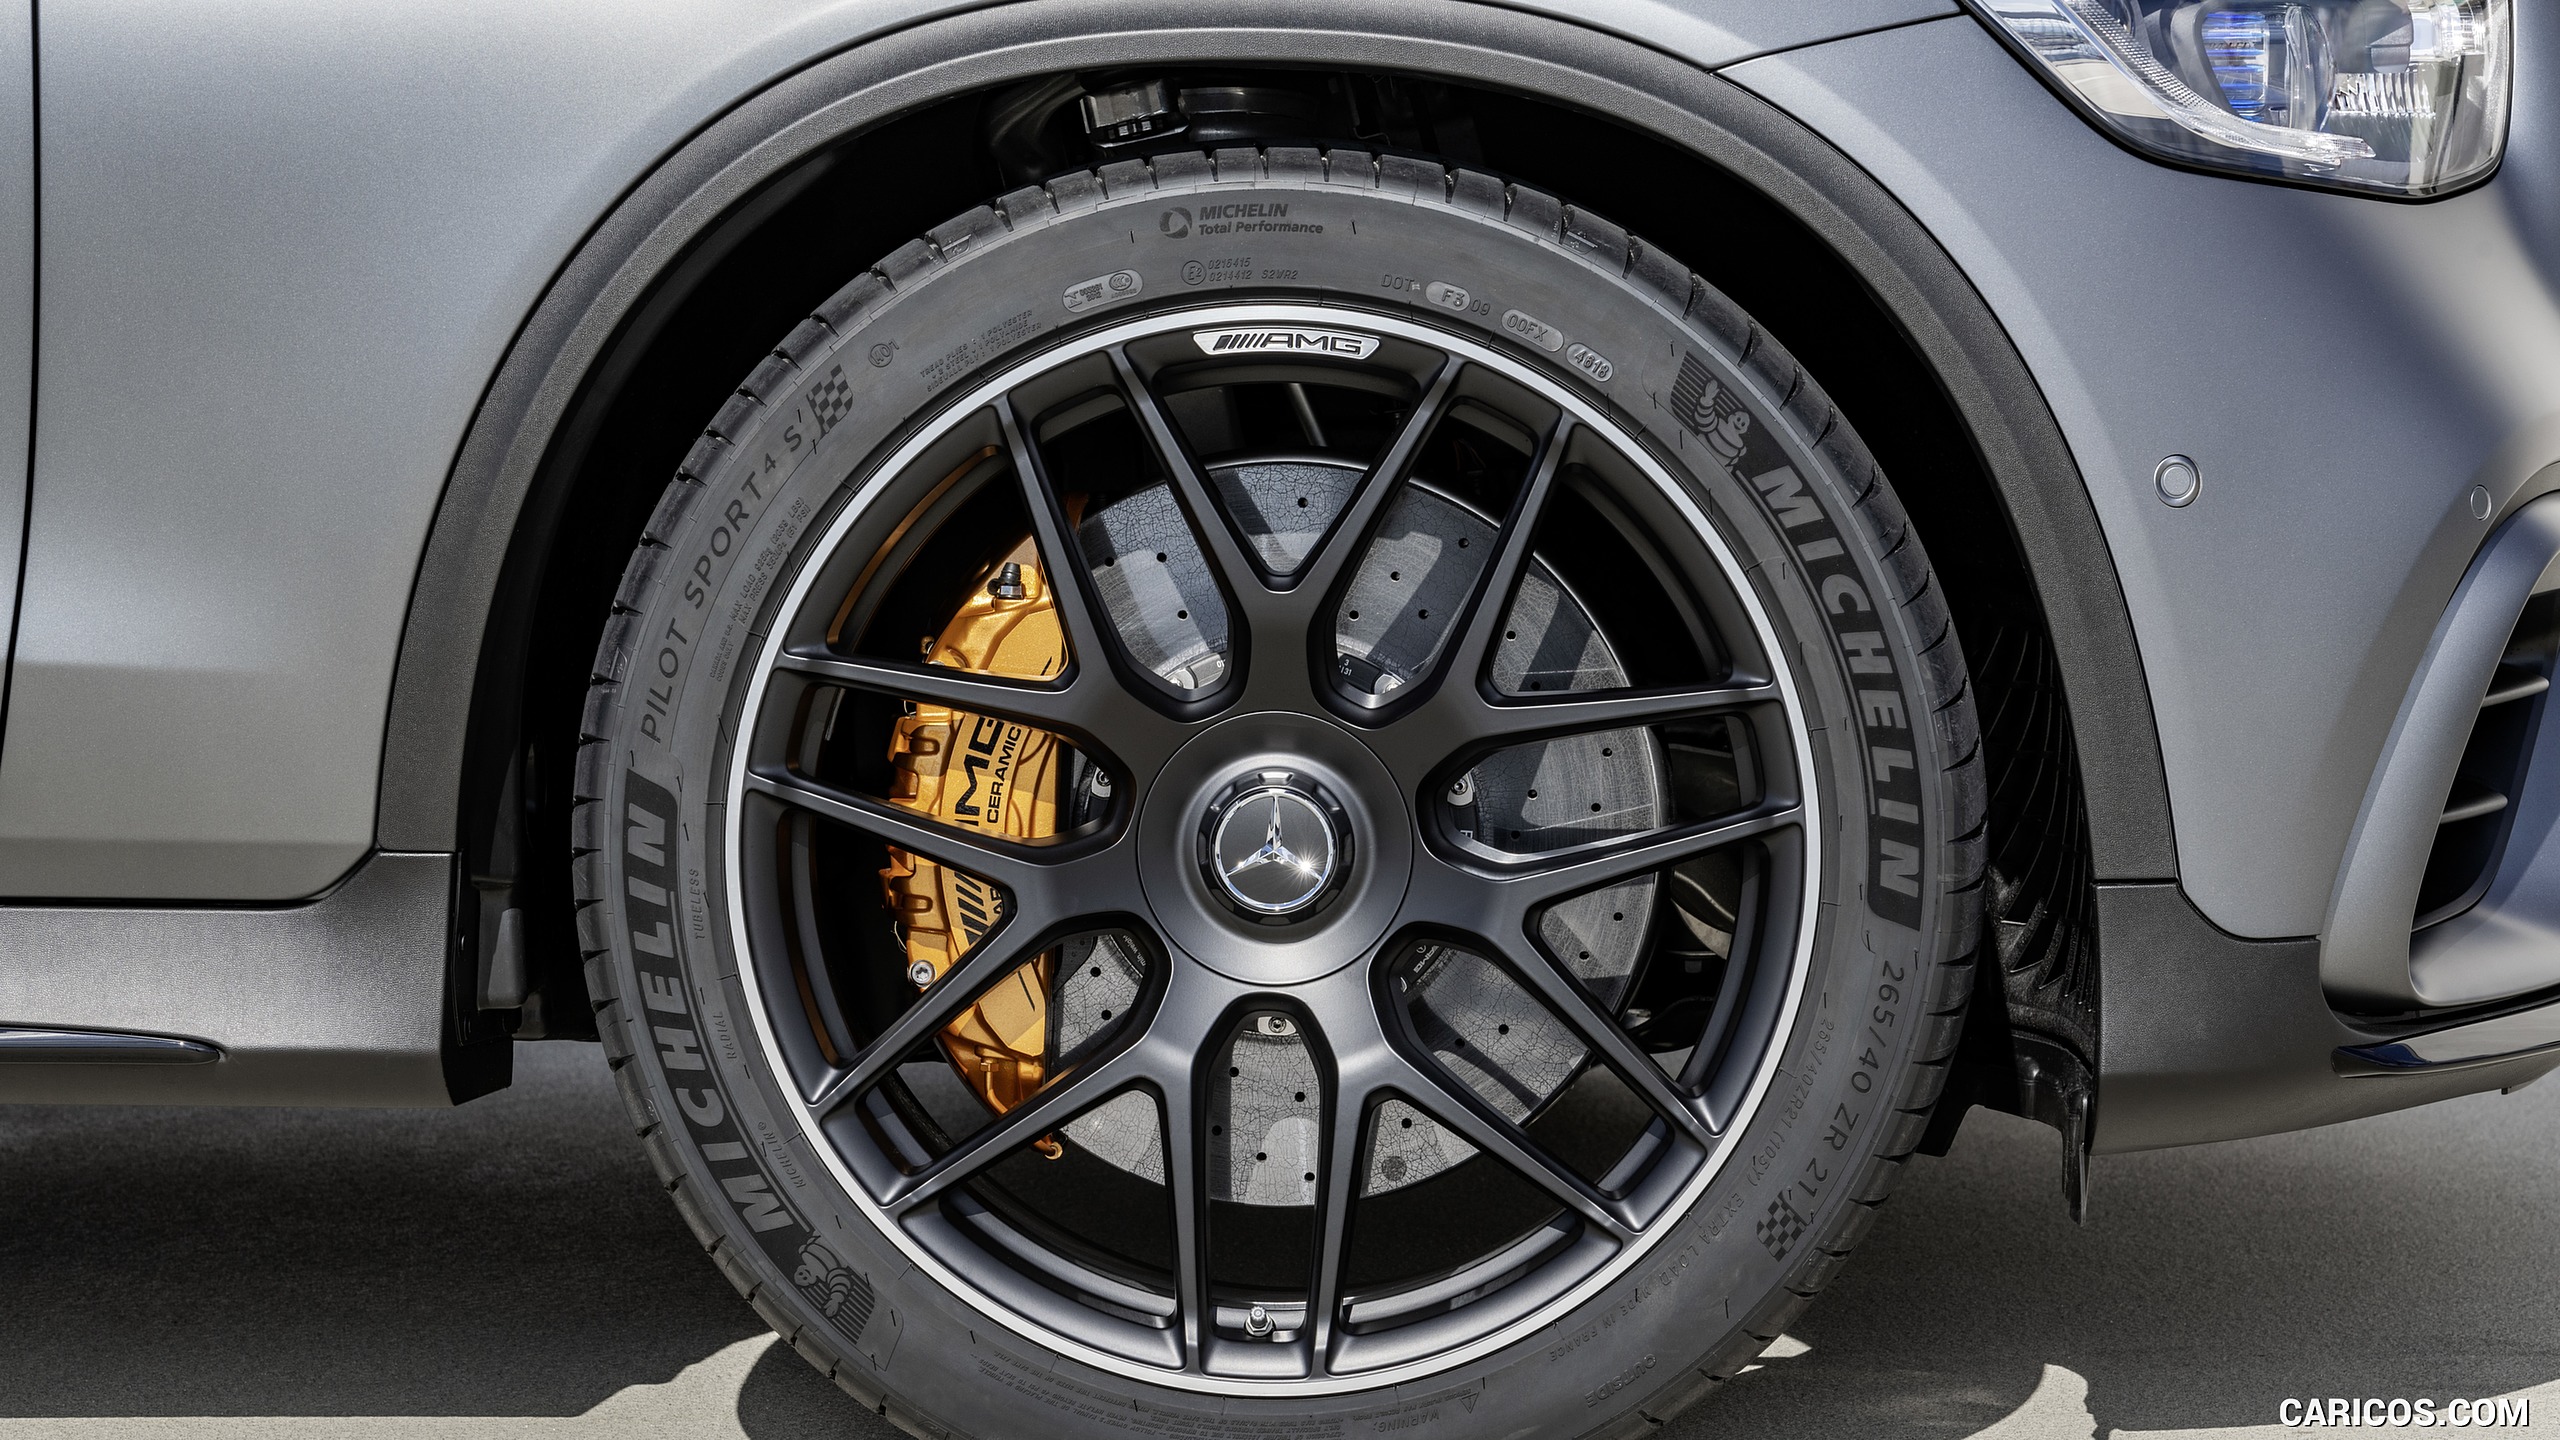 2020 Mercedes-AMG GLC 63 S 4MATIC+ Coupe - Wheel, #13 of 102